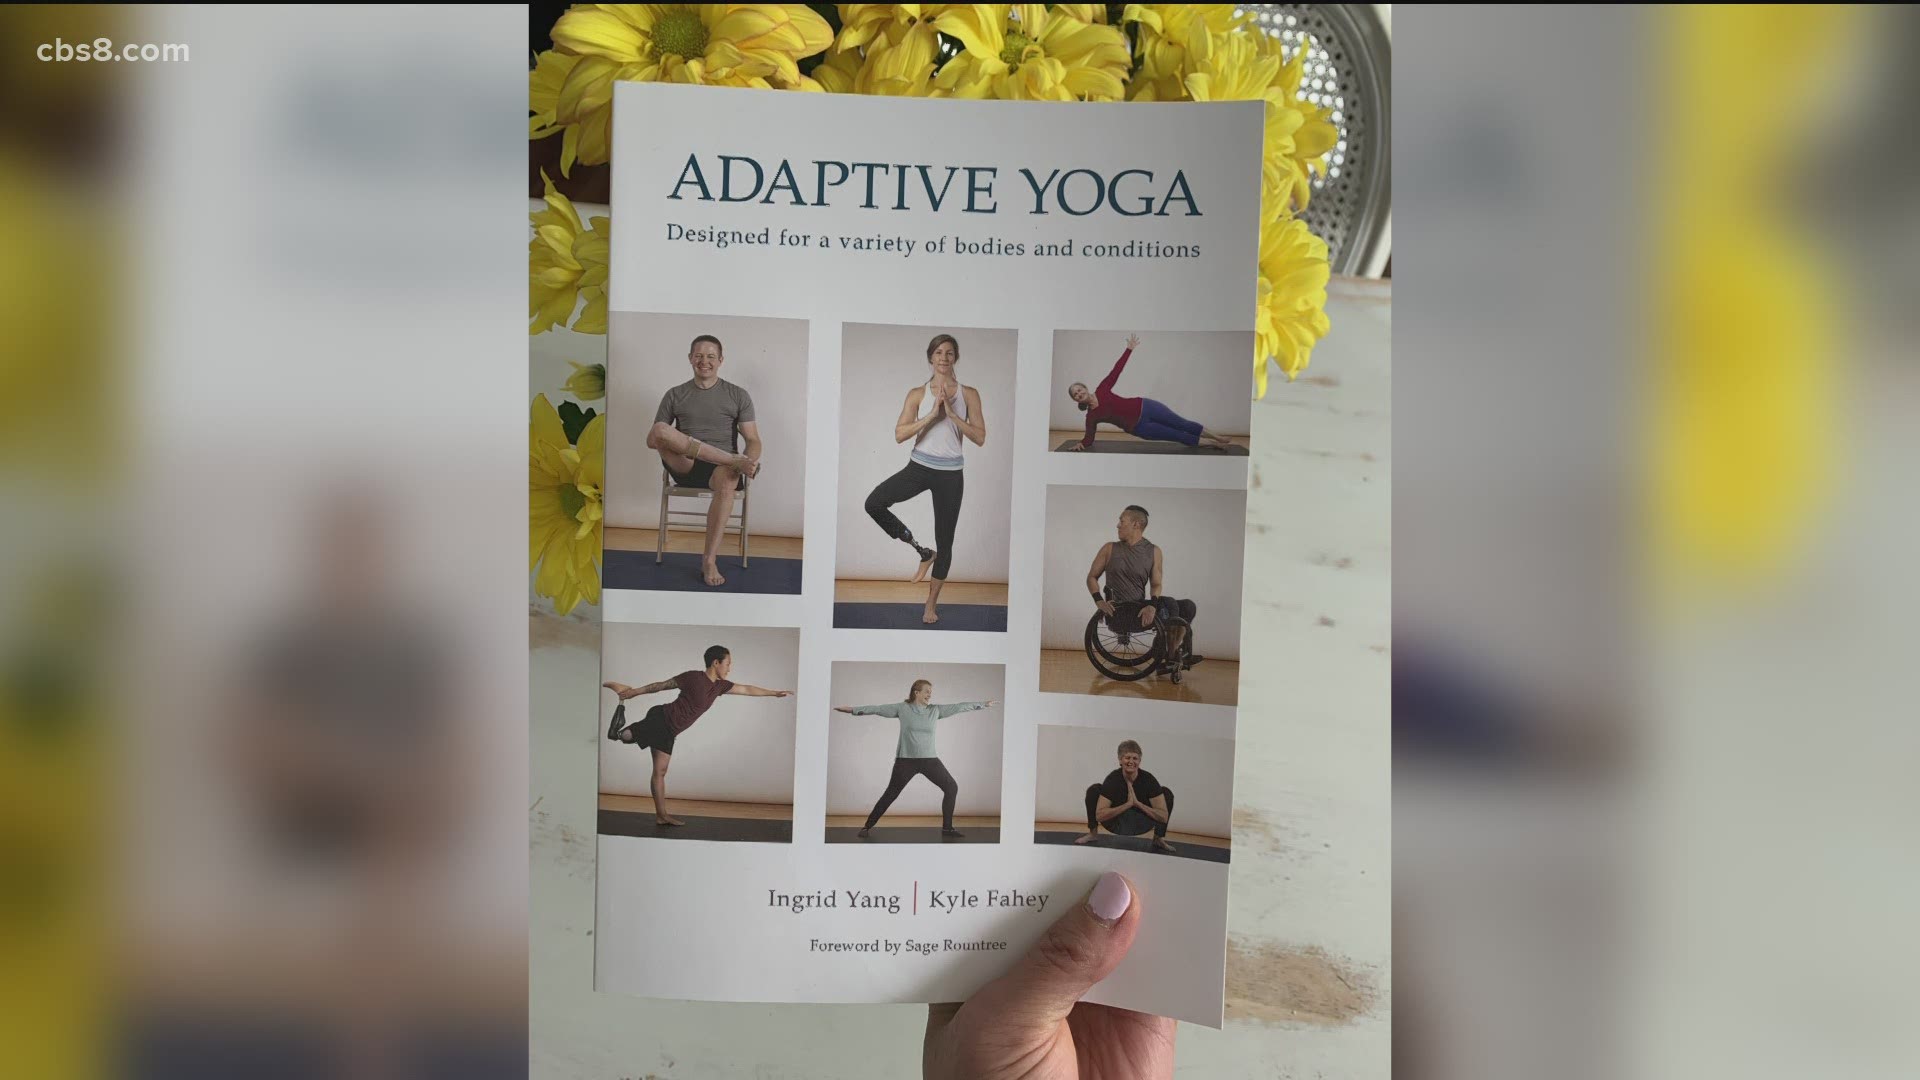 Dr. Ingrid Yang and Ryan Frasier joined Morning Extra to show some adaptive yoga and to talk about the conditions it can help.